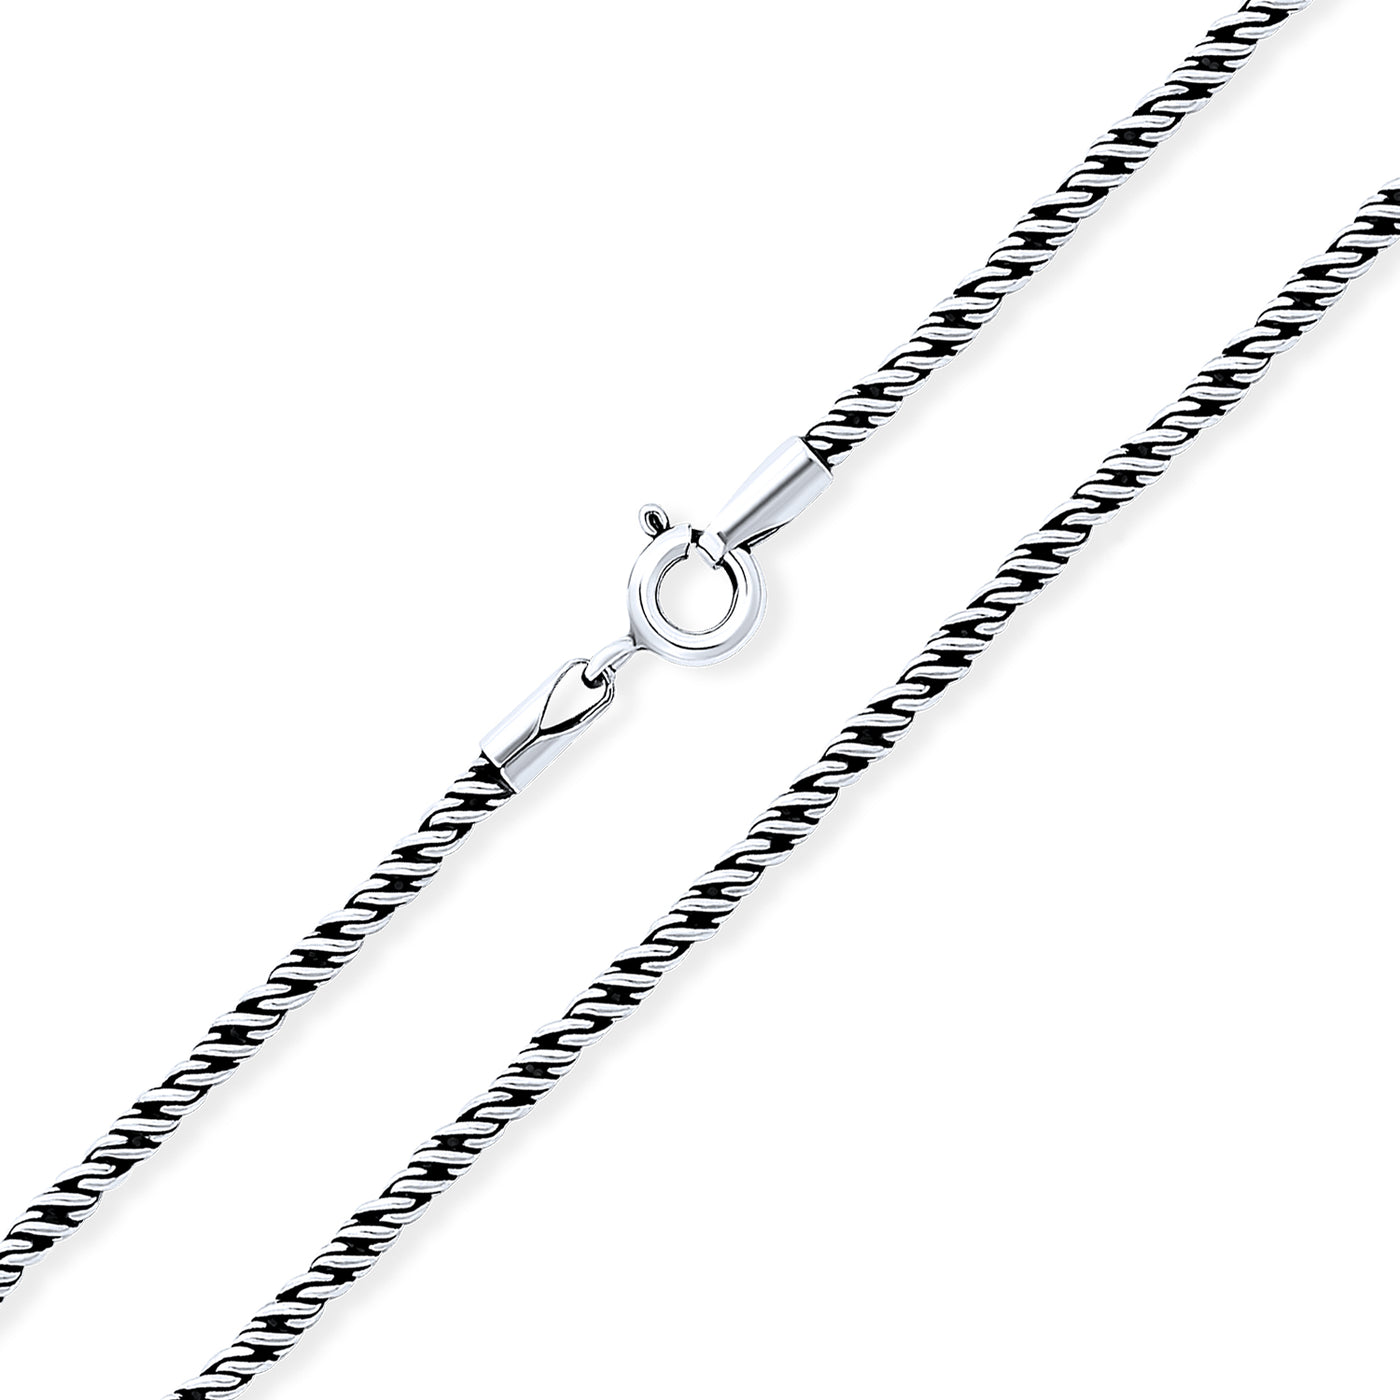 Bali Style Rope Twist Chain Black Oxidized Sterling Silver 2MM Strong